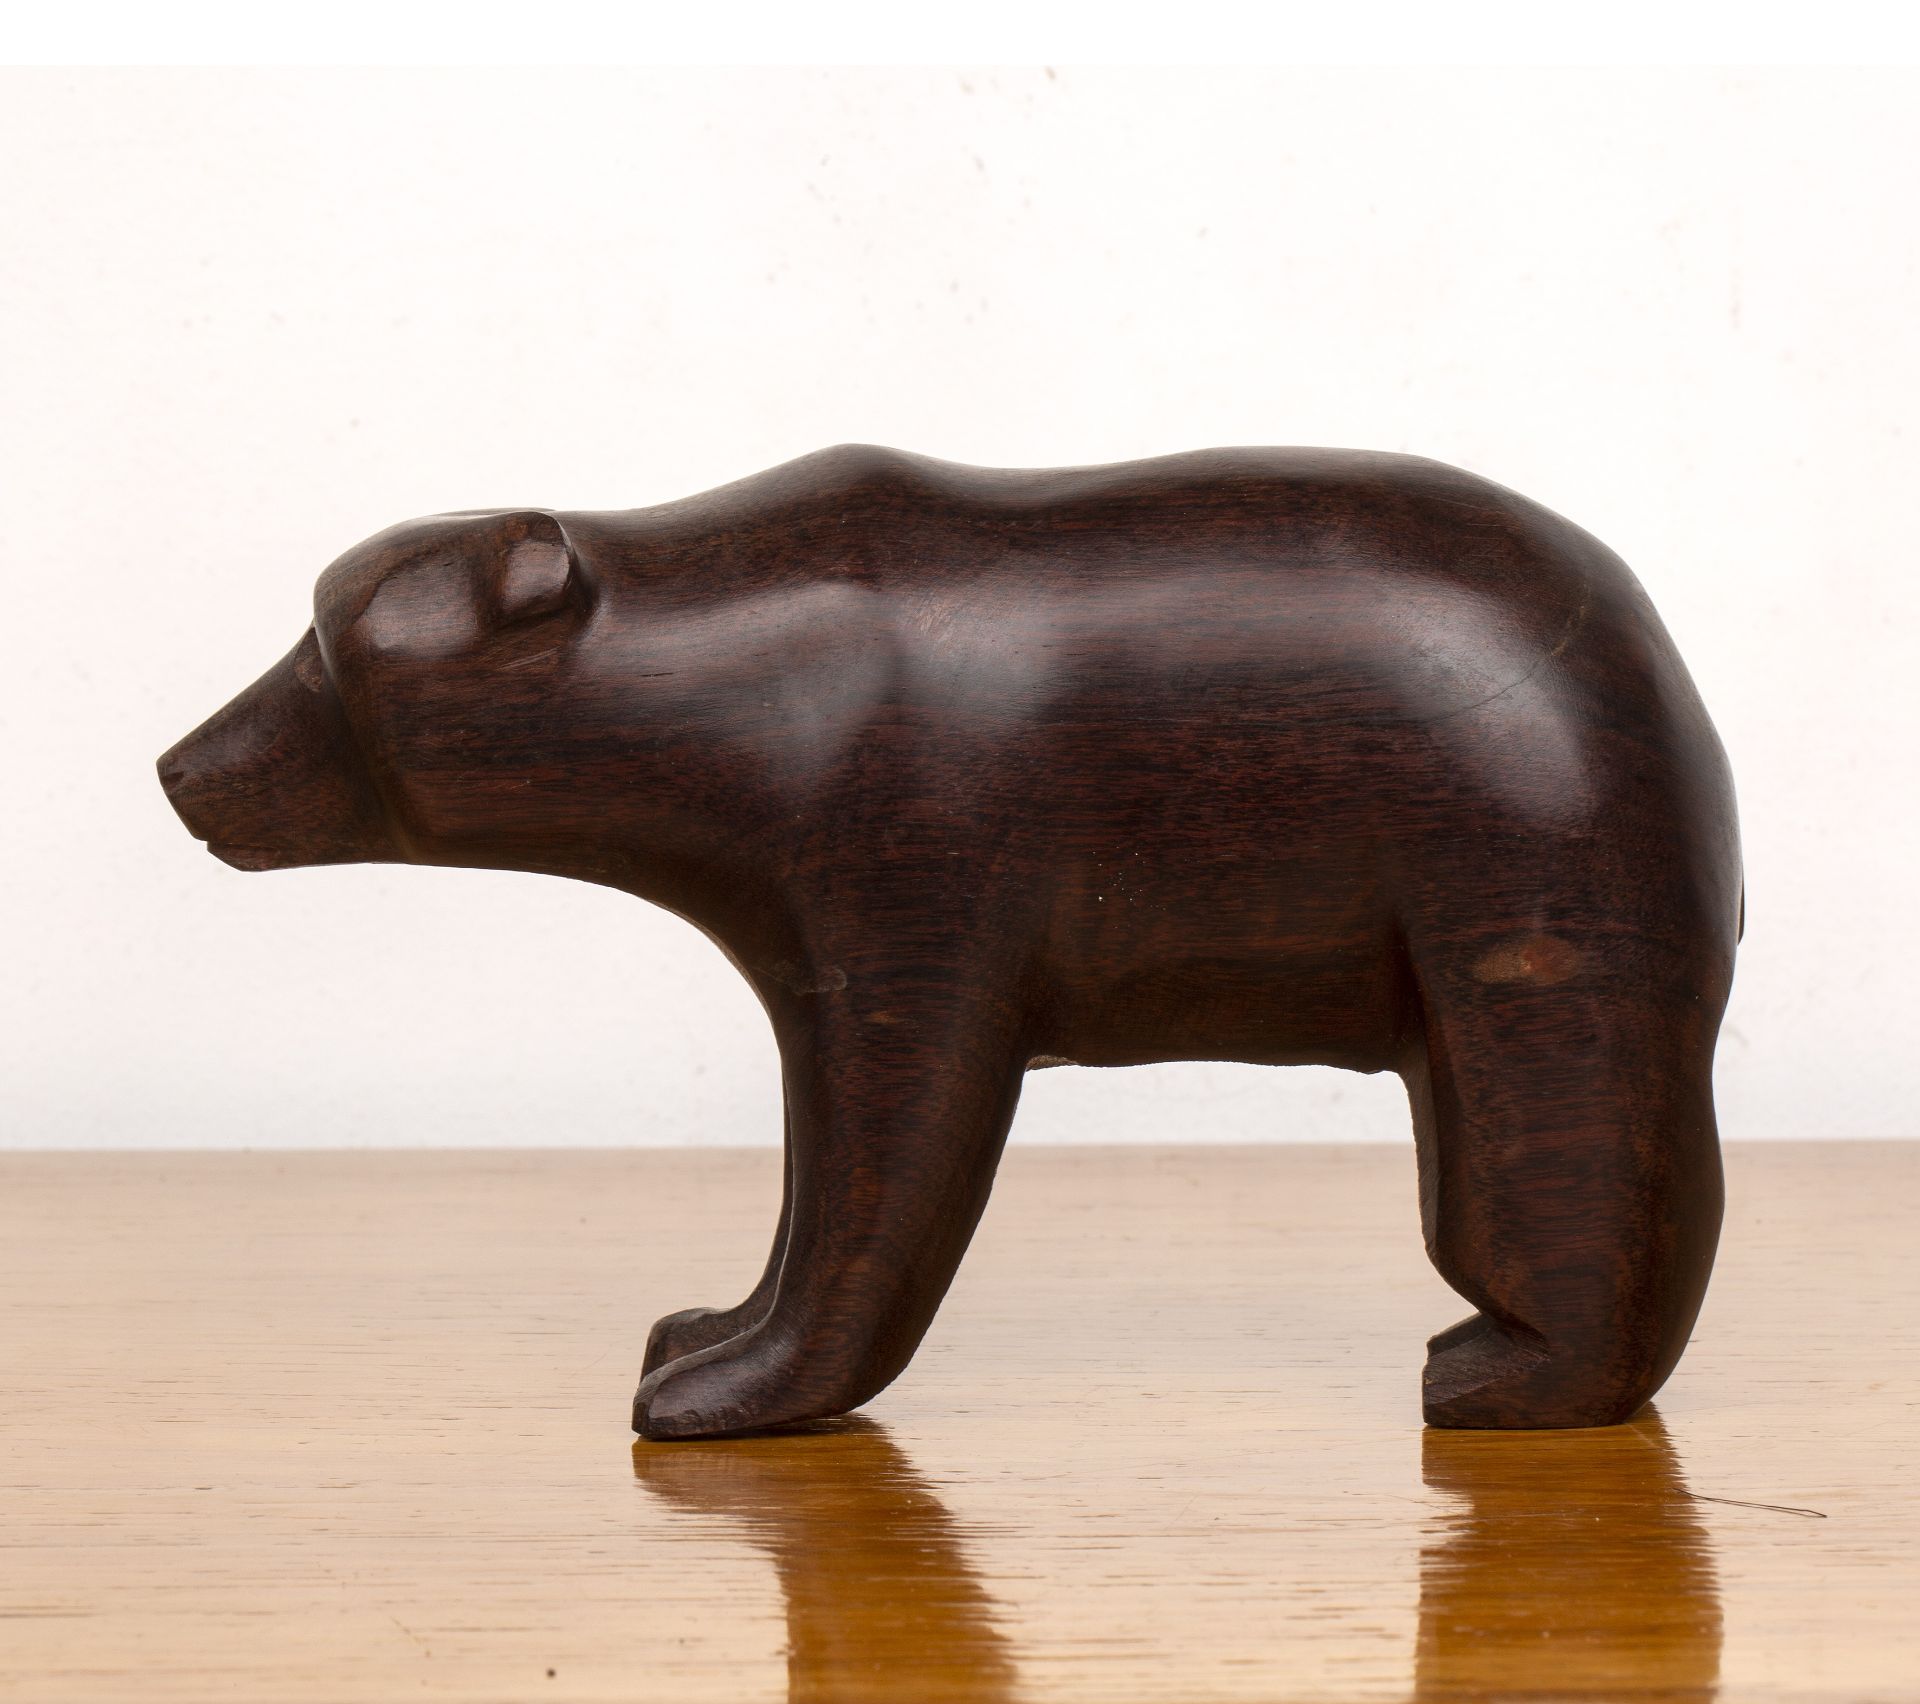 Treen wooden bear with carved details, unsigned, 17cm wide x 11cm high Overall signs of display